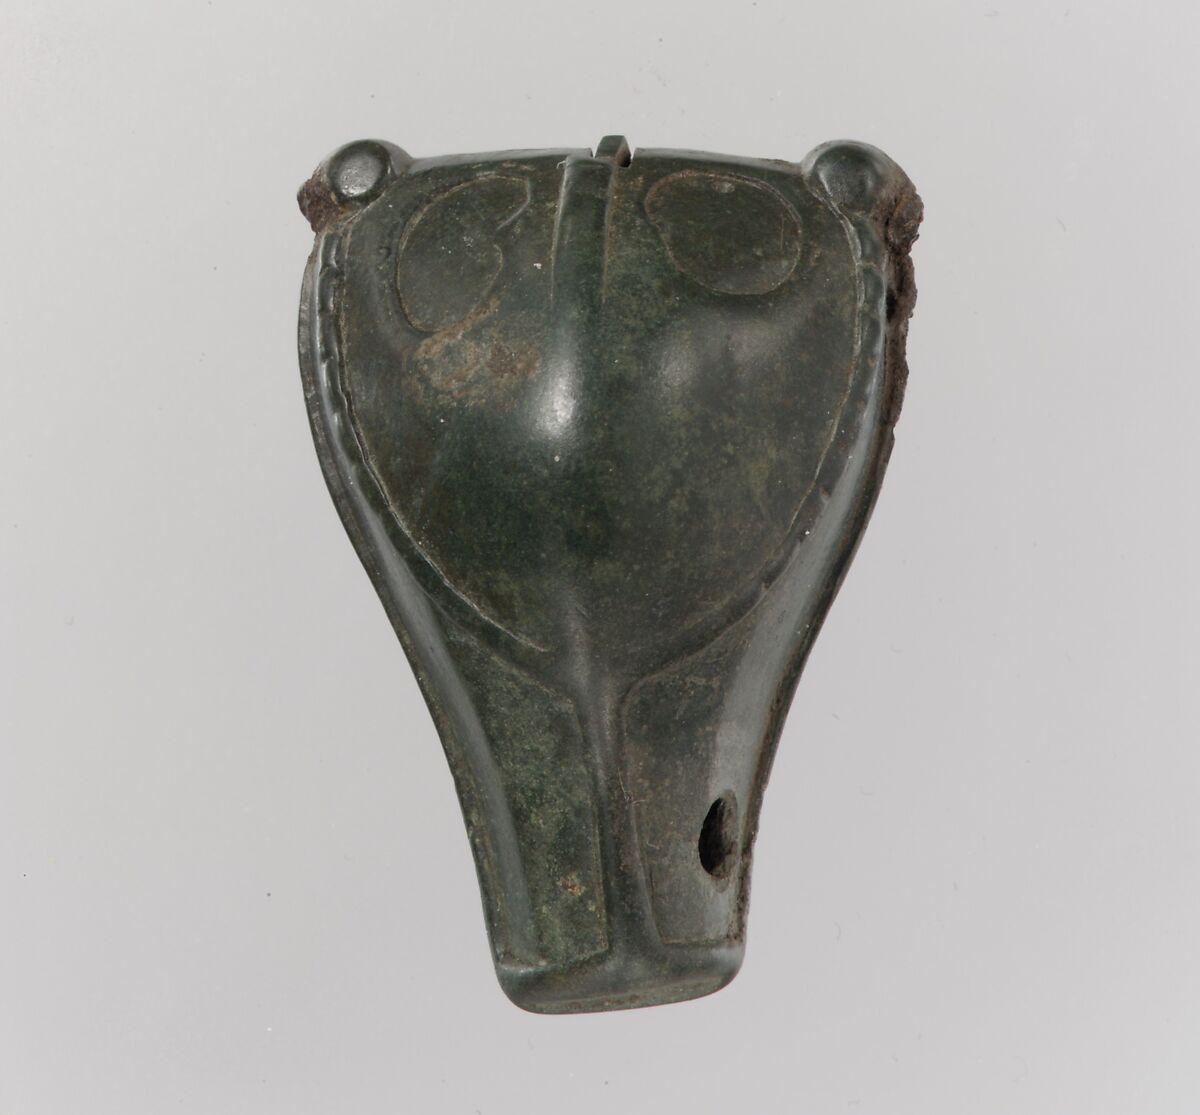 Brooch with Boar’s-Head, Copper alloy, gilt and cast; copper alloy pin secured in hinge with..., Vendel 